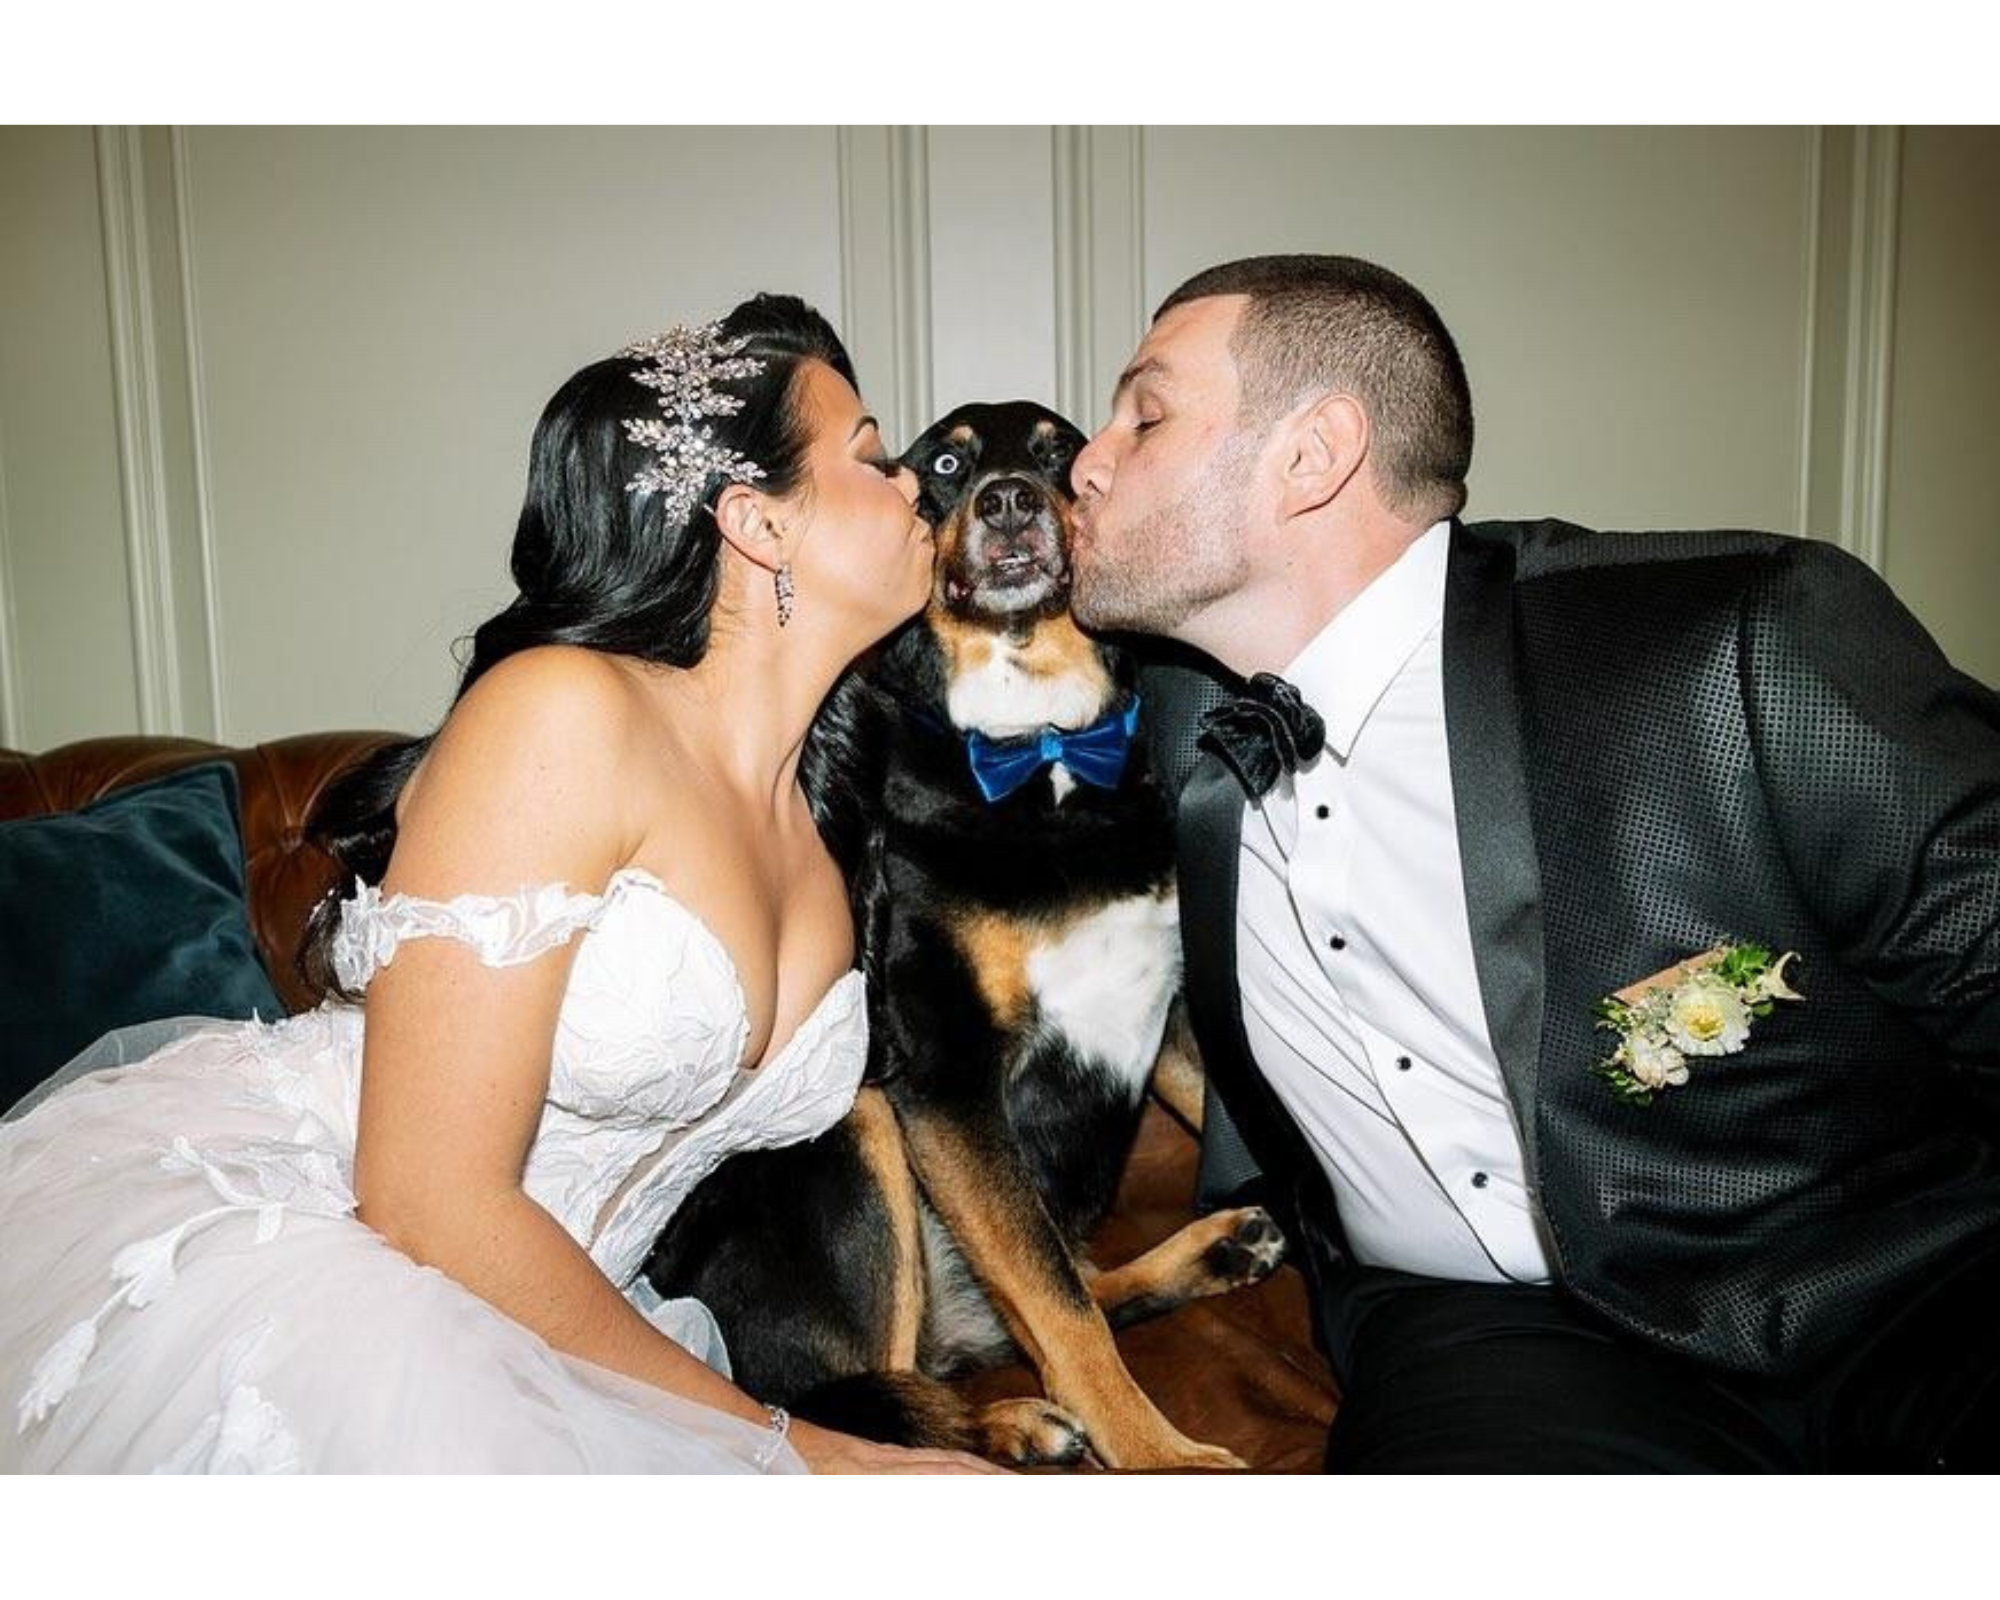 Our beautiful bride in her gown and bridal headpiece and her groom in his tux kiss their adorable dog!